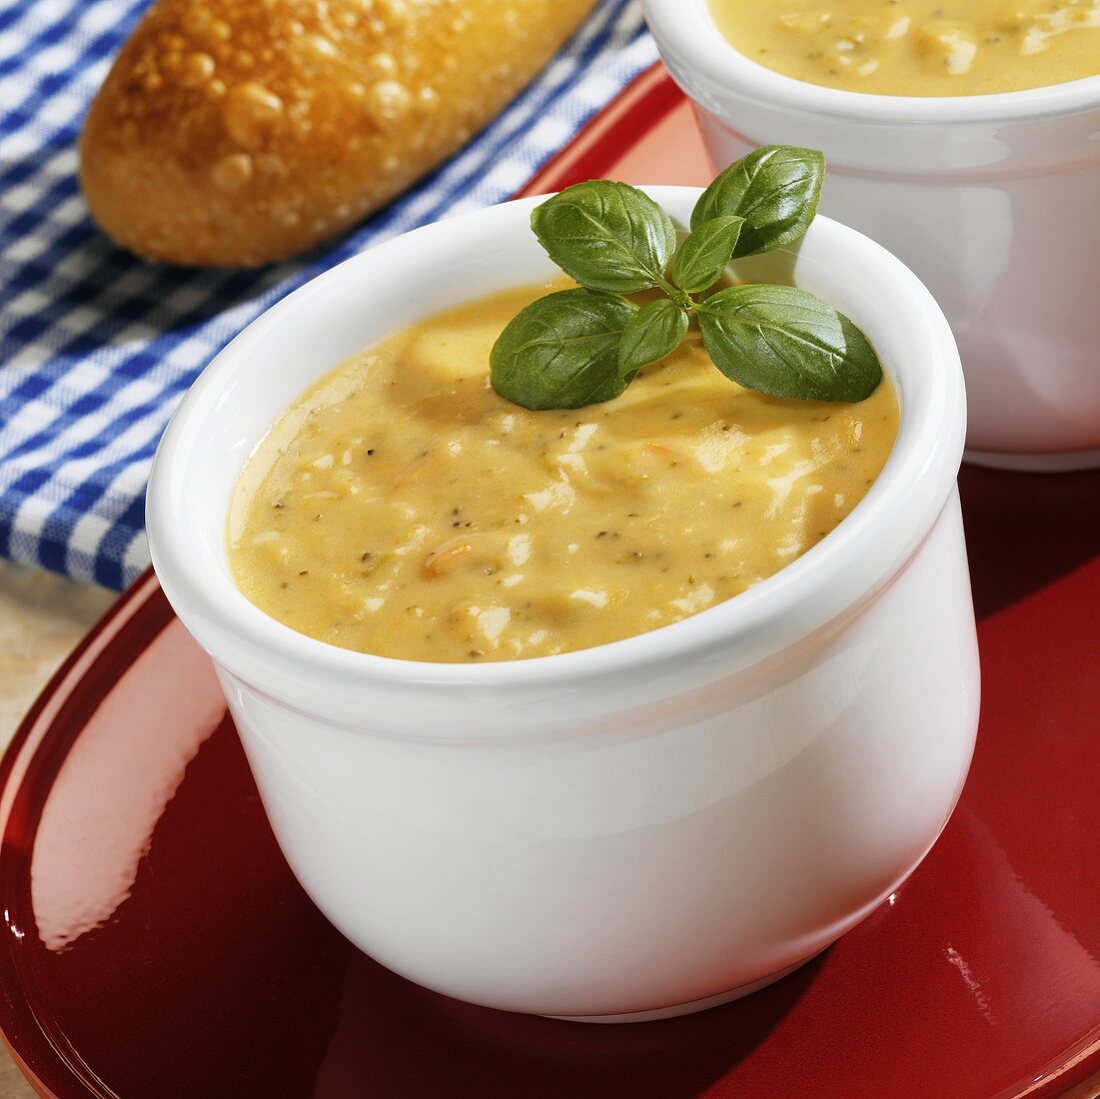 Cheddar Cheese Soup with Basil in a White Bowl